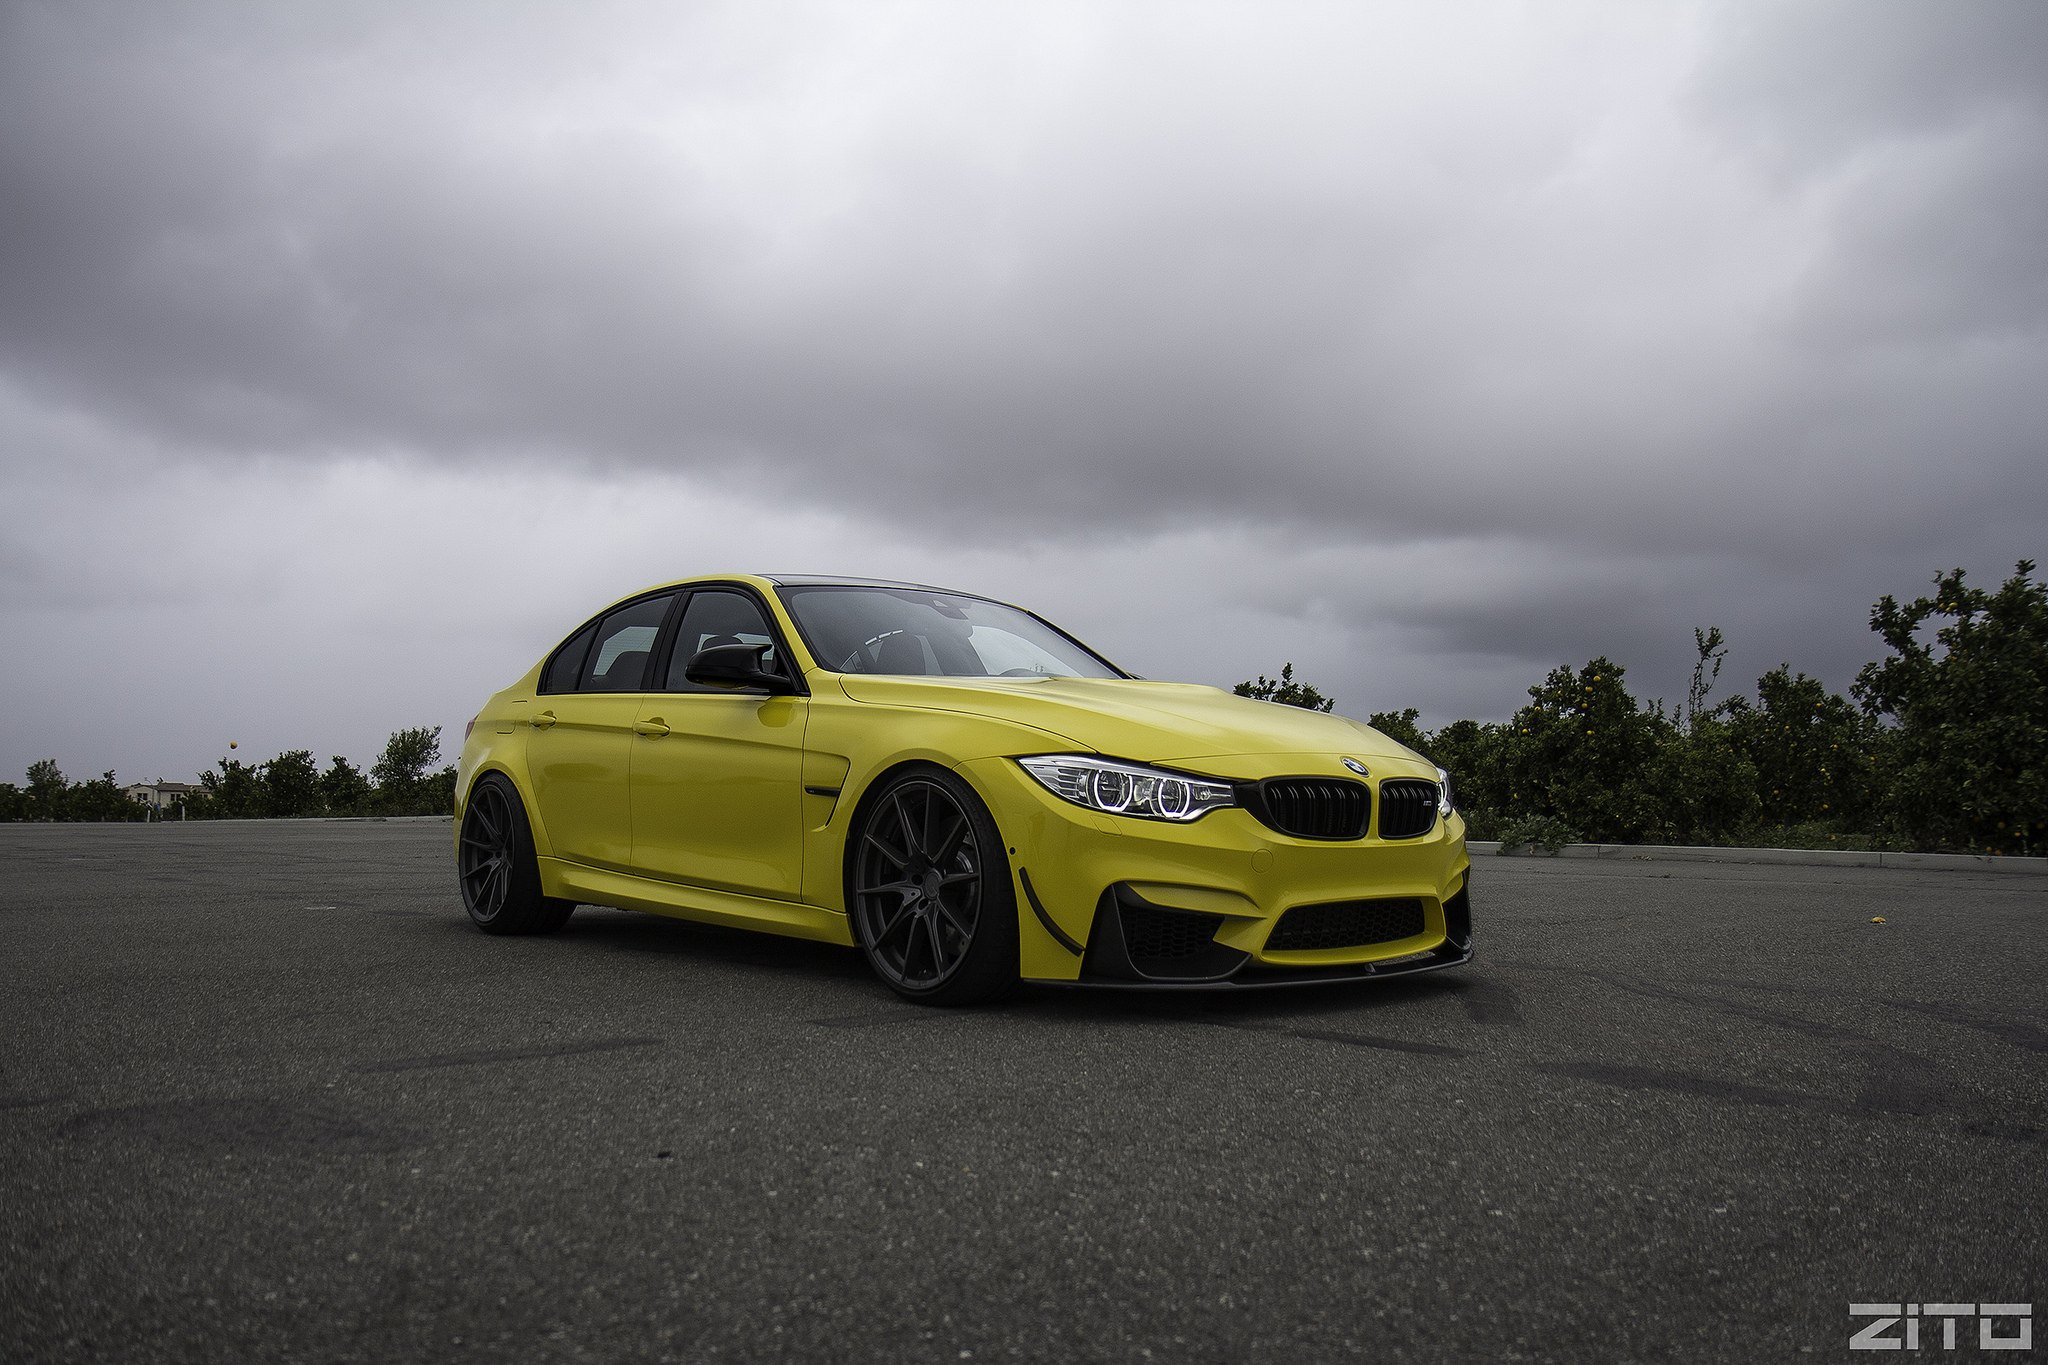 Aftermarket Halo Headlights on Yellow BMW 3-Series - Photo by Zito Wheels